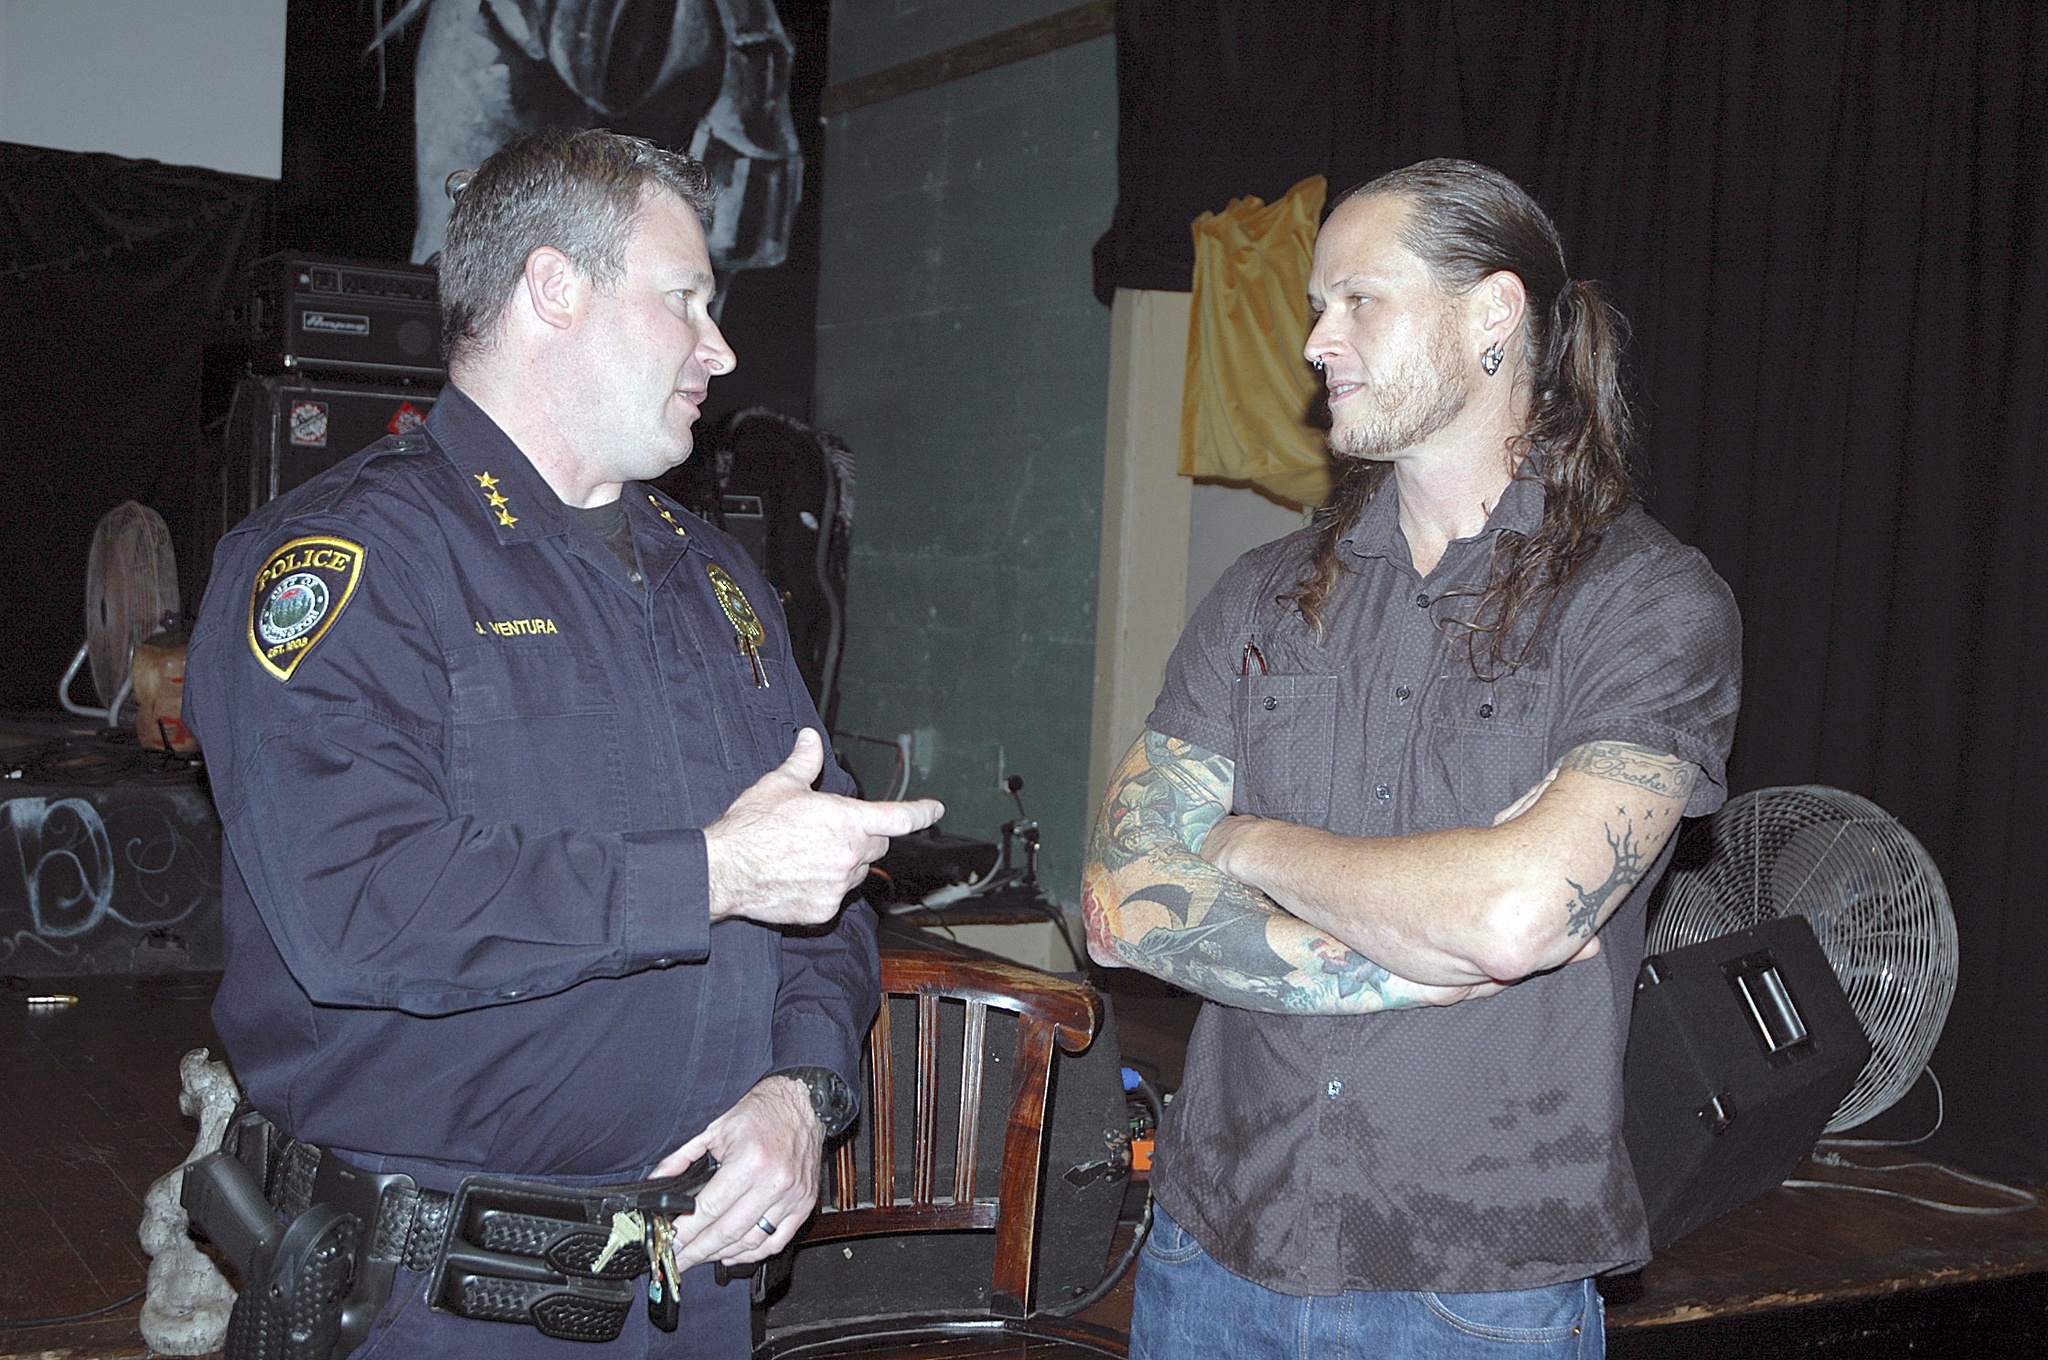 Kirk Boxleitner/Staff PhotoArlington Police Chief Jonathan Ventura chats with Anthony Beck